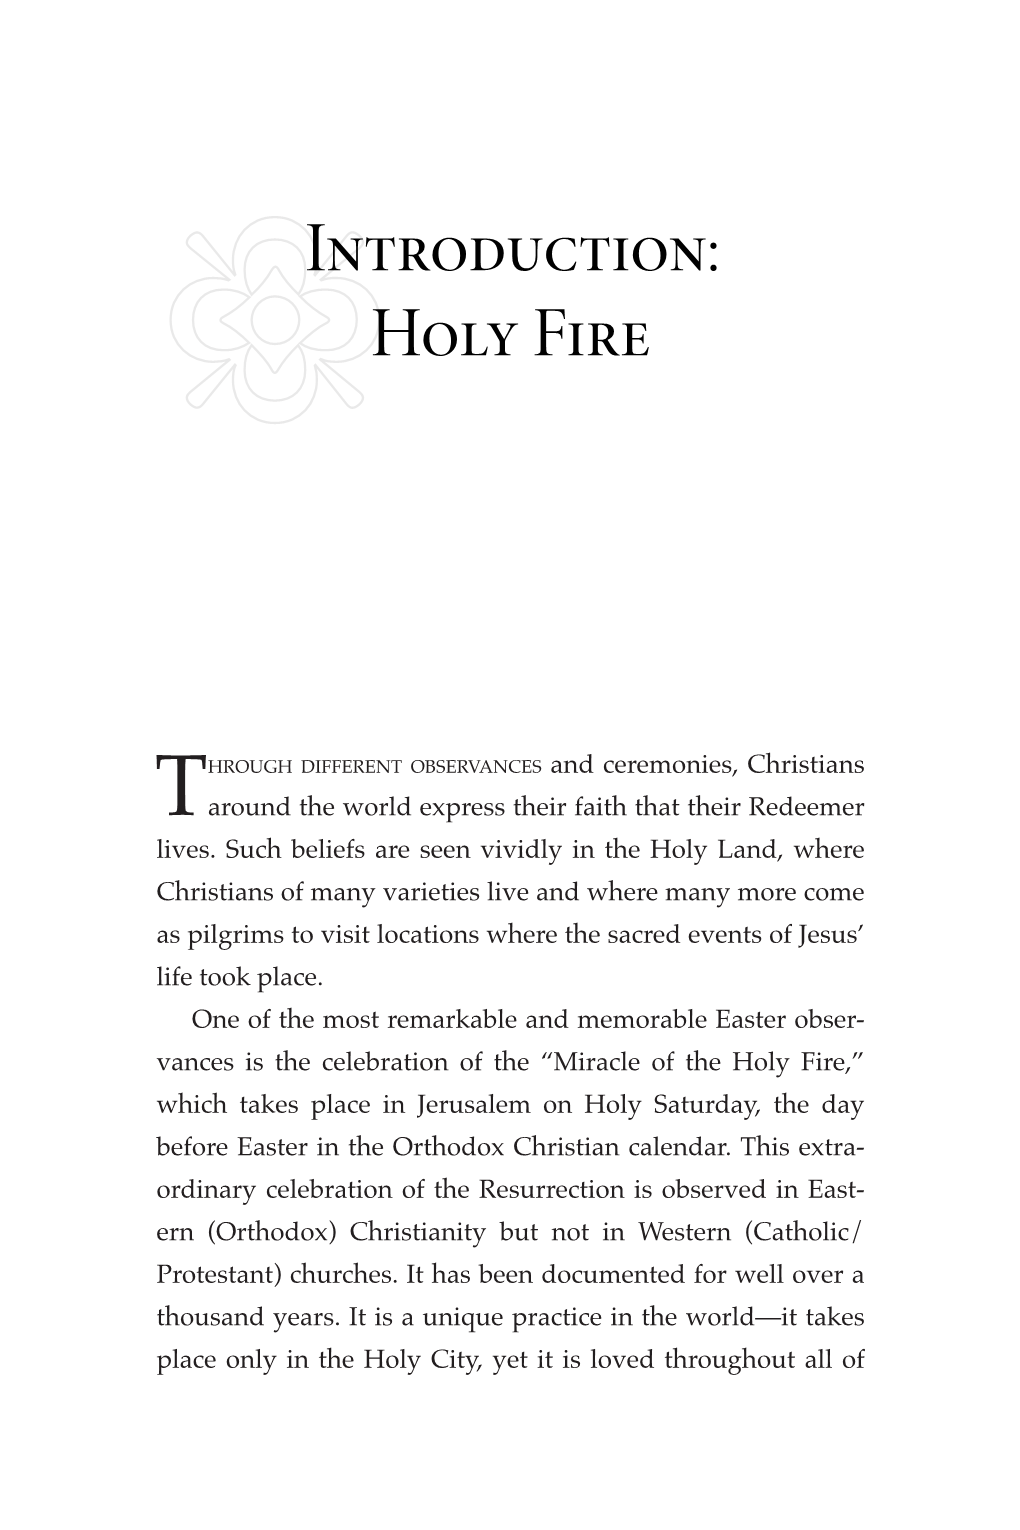 Introduction: Holy Fire